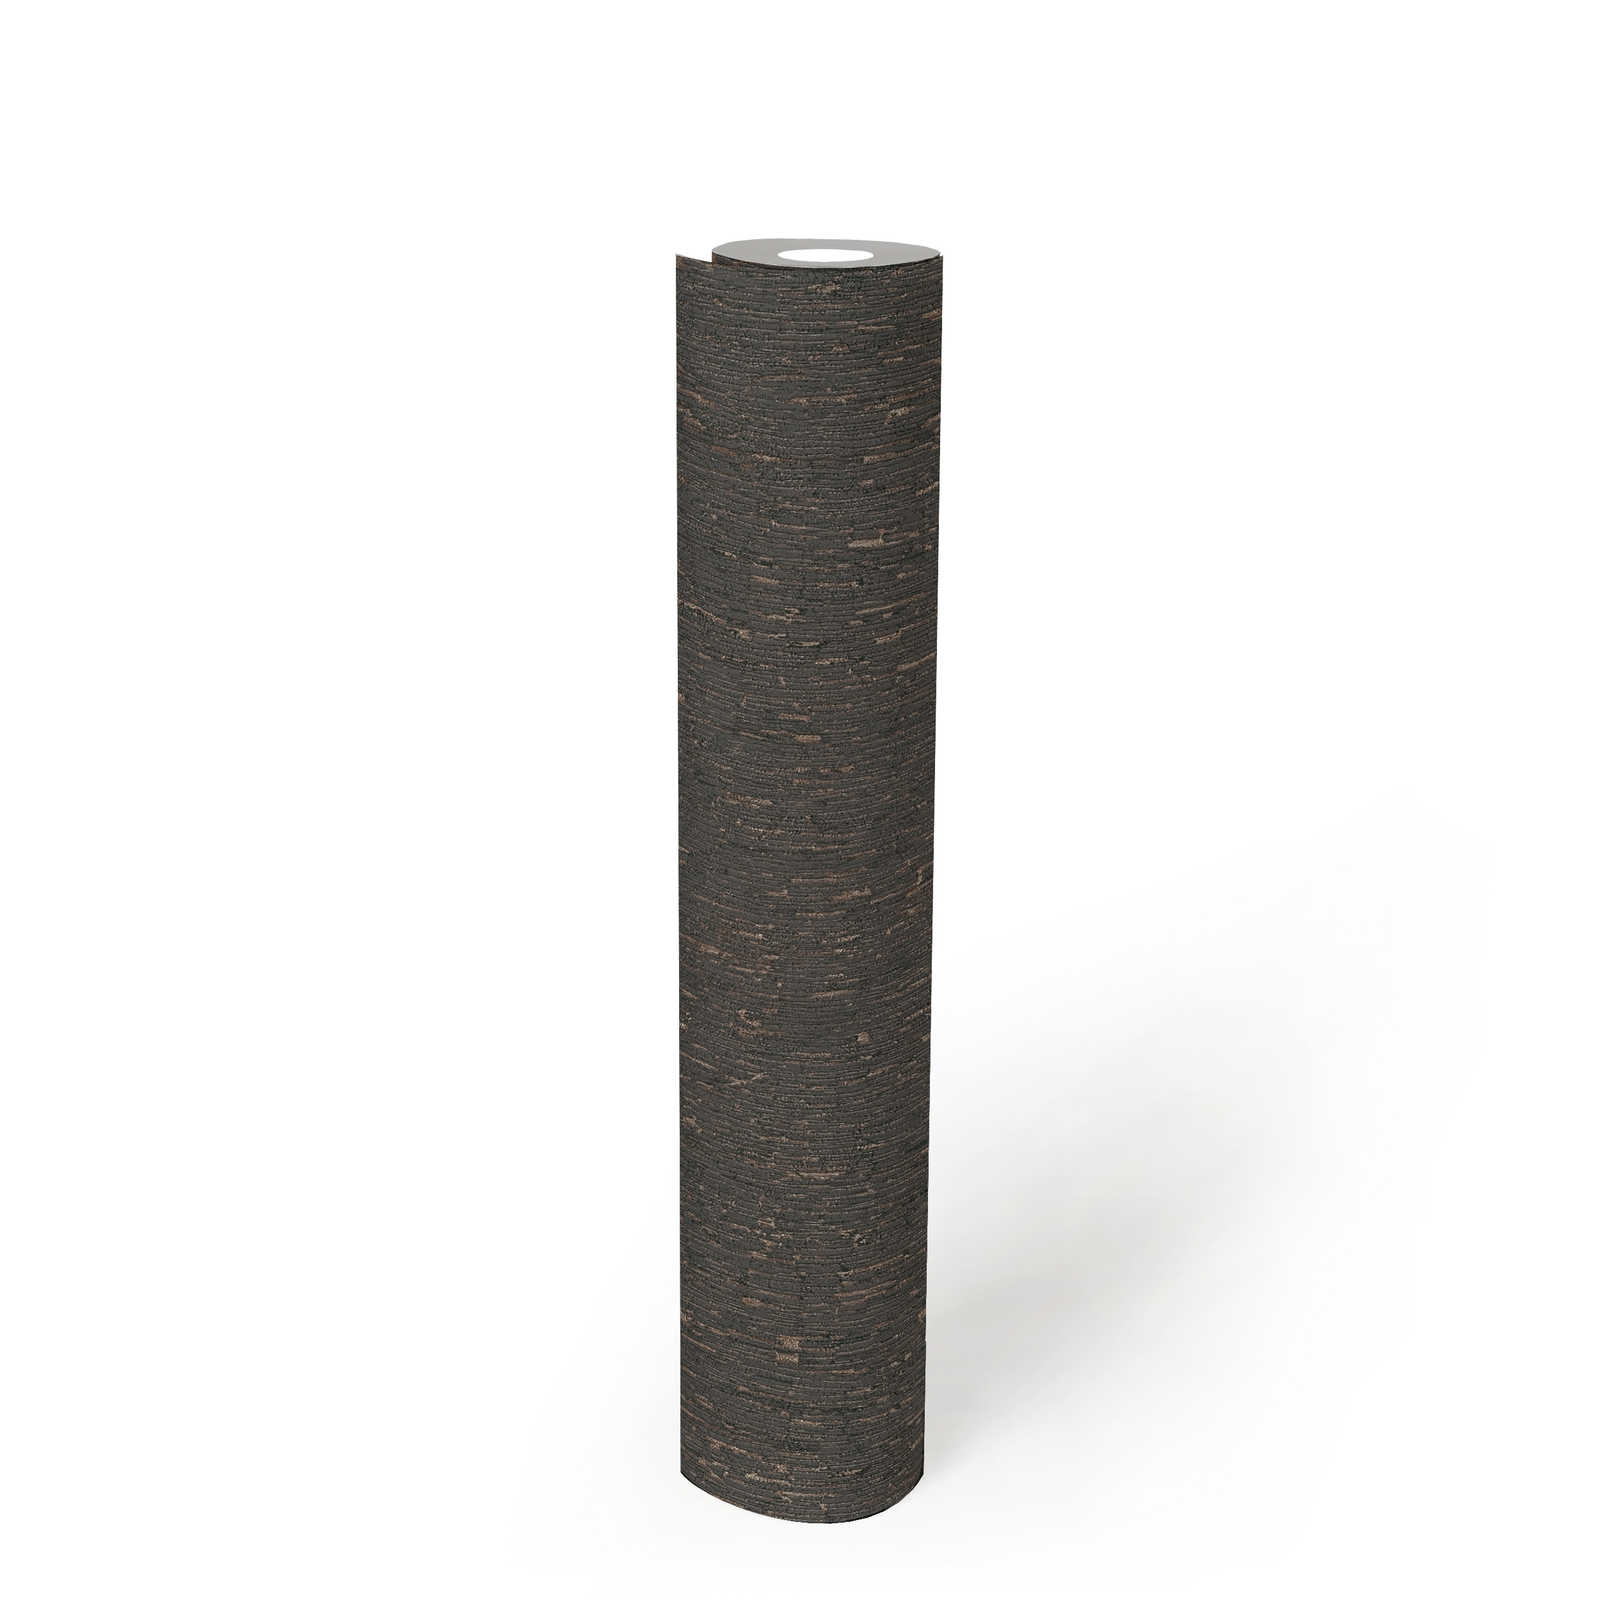             Plaster-look wallpaper with gold accents - black, silver, metallic
        